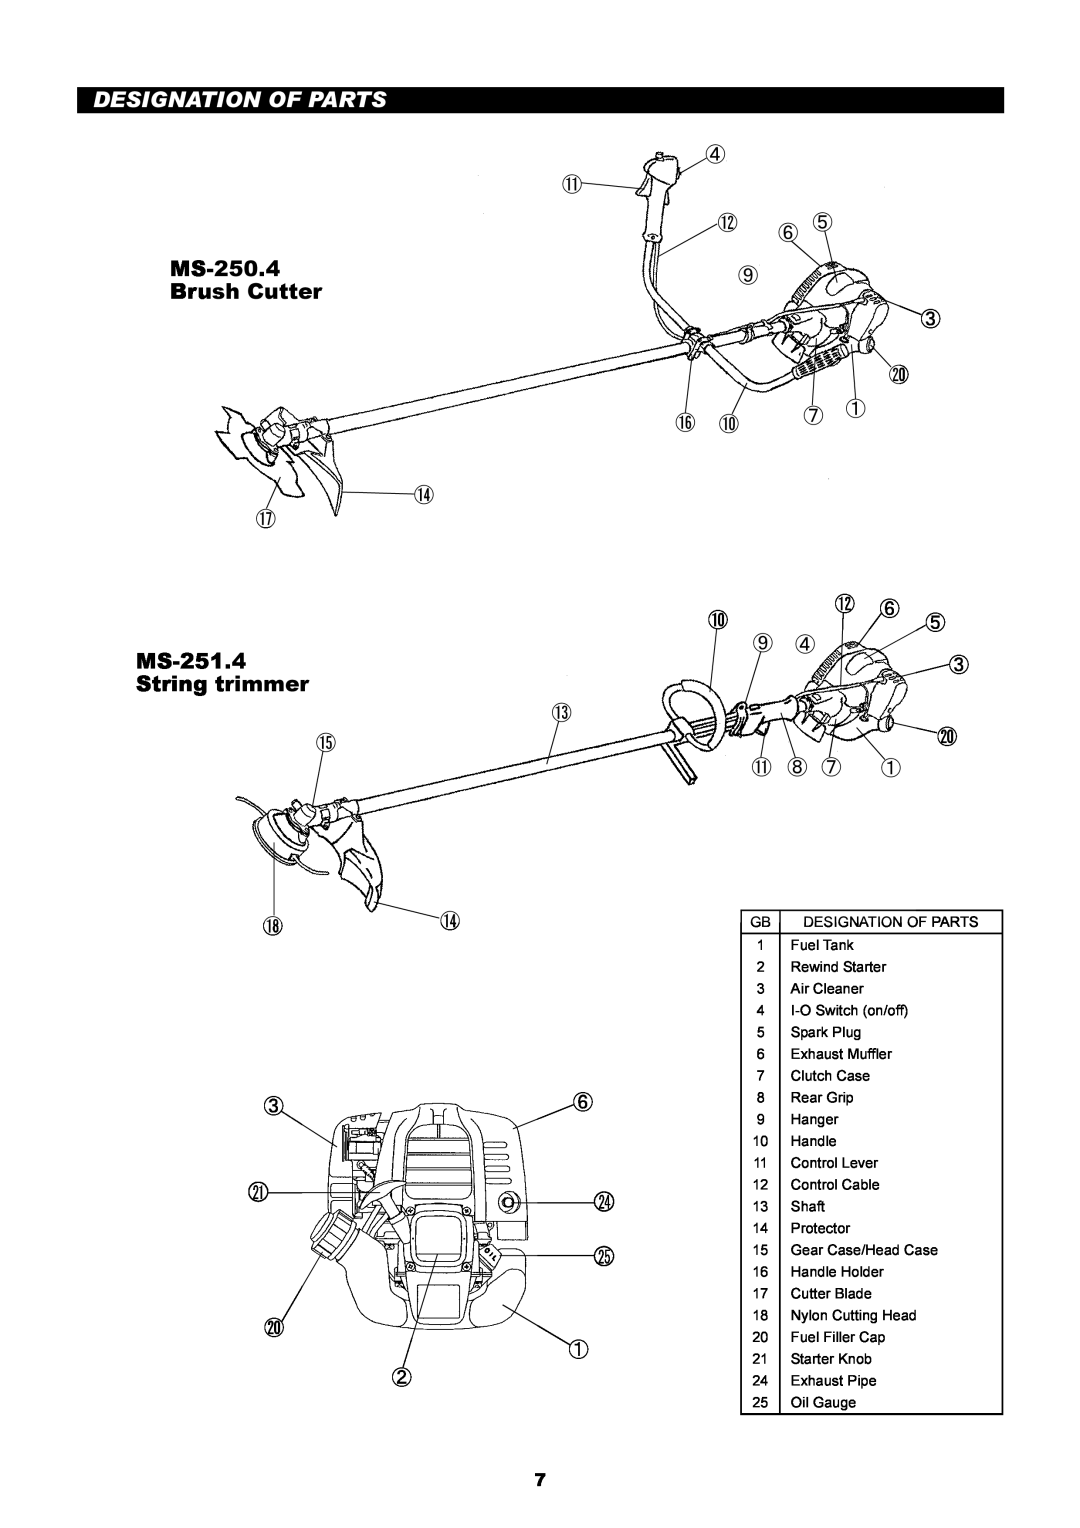 Dolmar instruction manual Designation Of Parts, MS-250.4 Brush Cutter, MS-251.4 String trimmer 